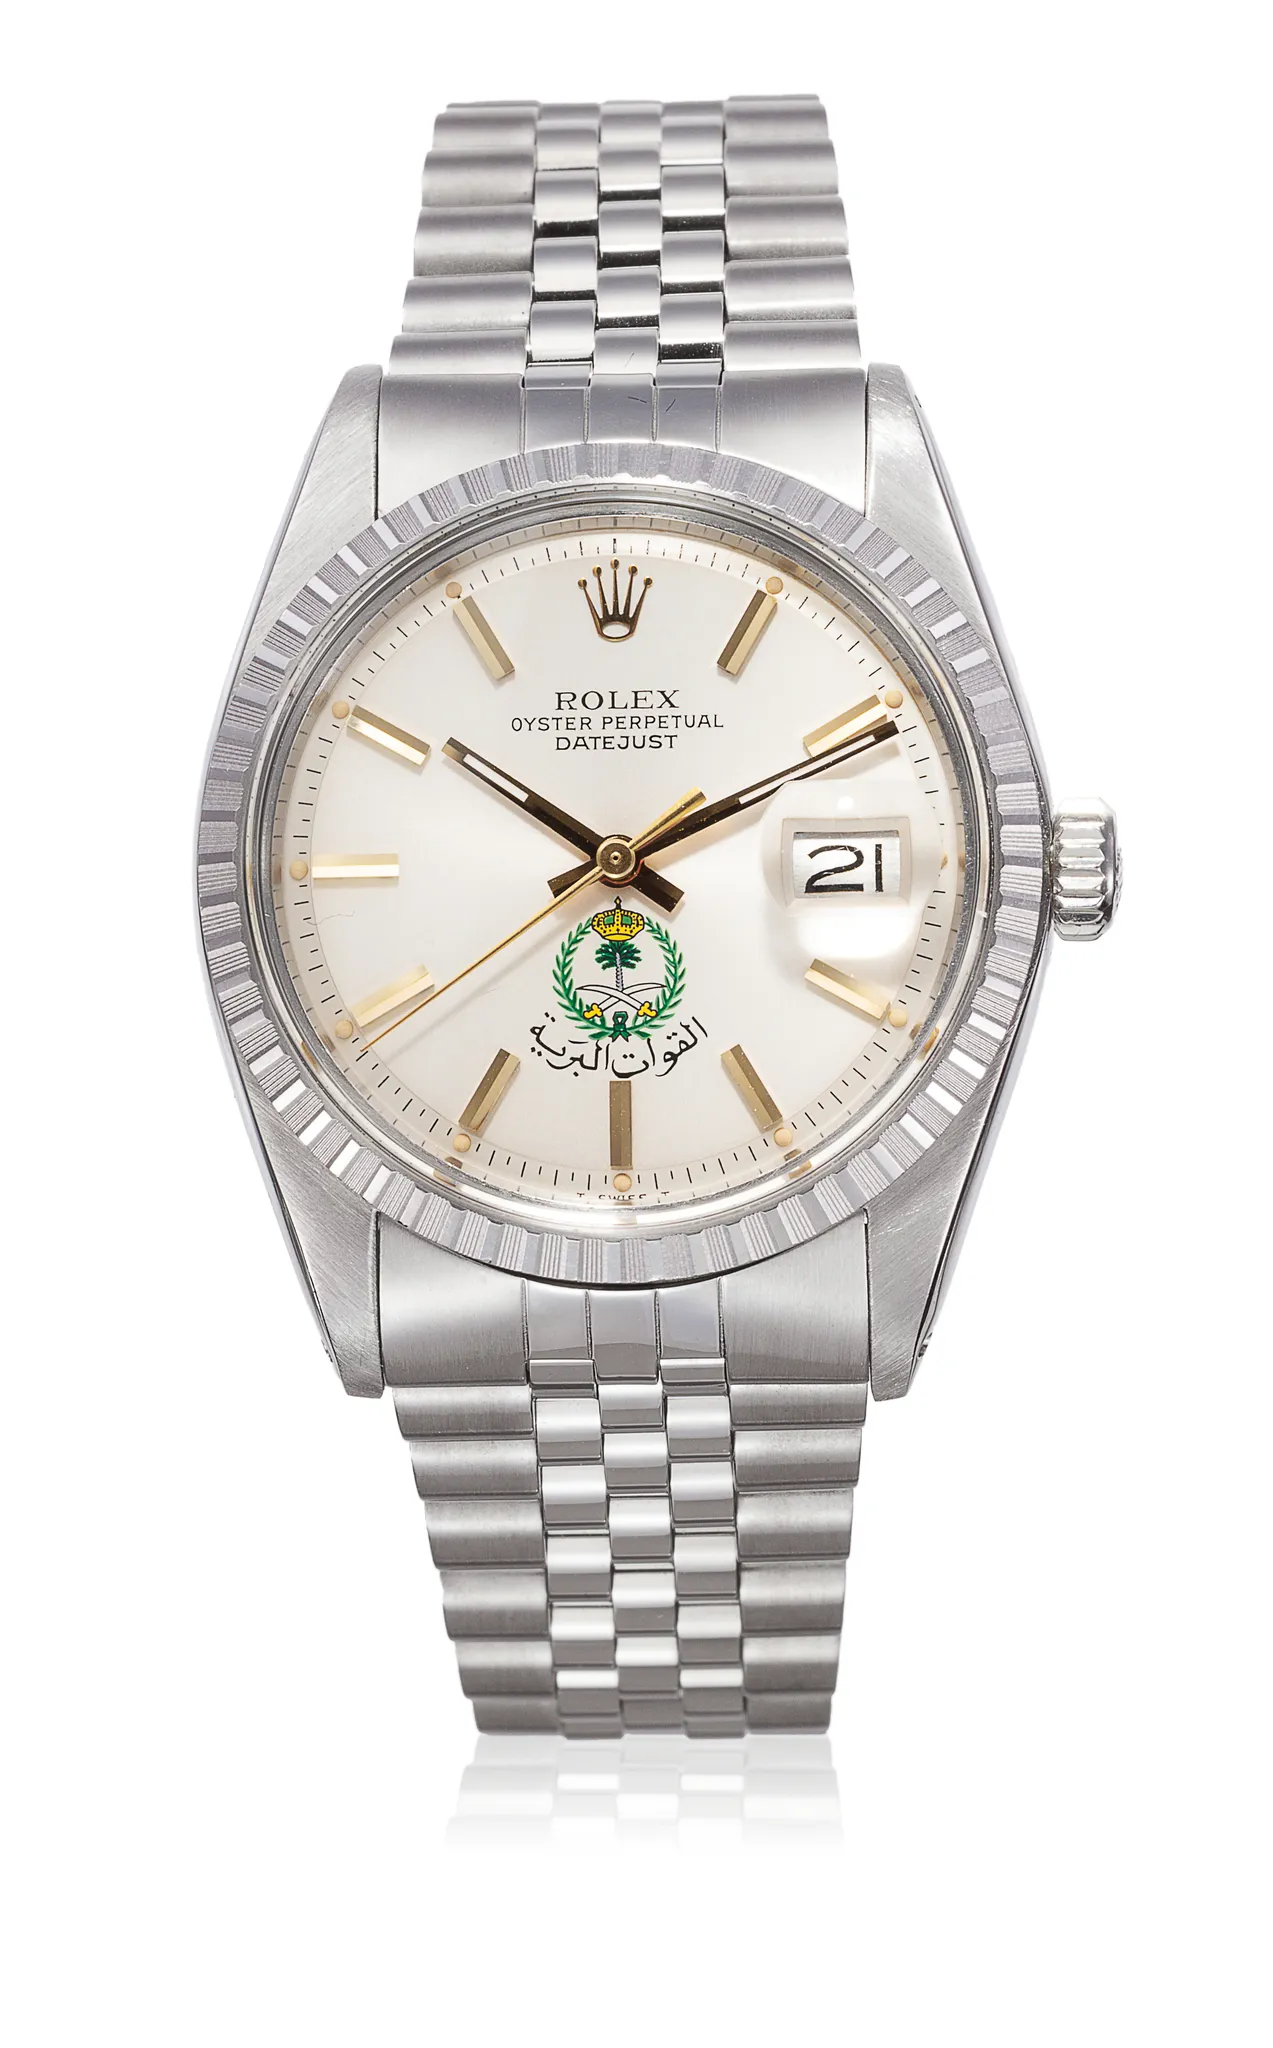 Rolex Oyster Perpetual "Datejust" 1603 34.4mm Stainless steel Silver